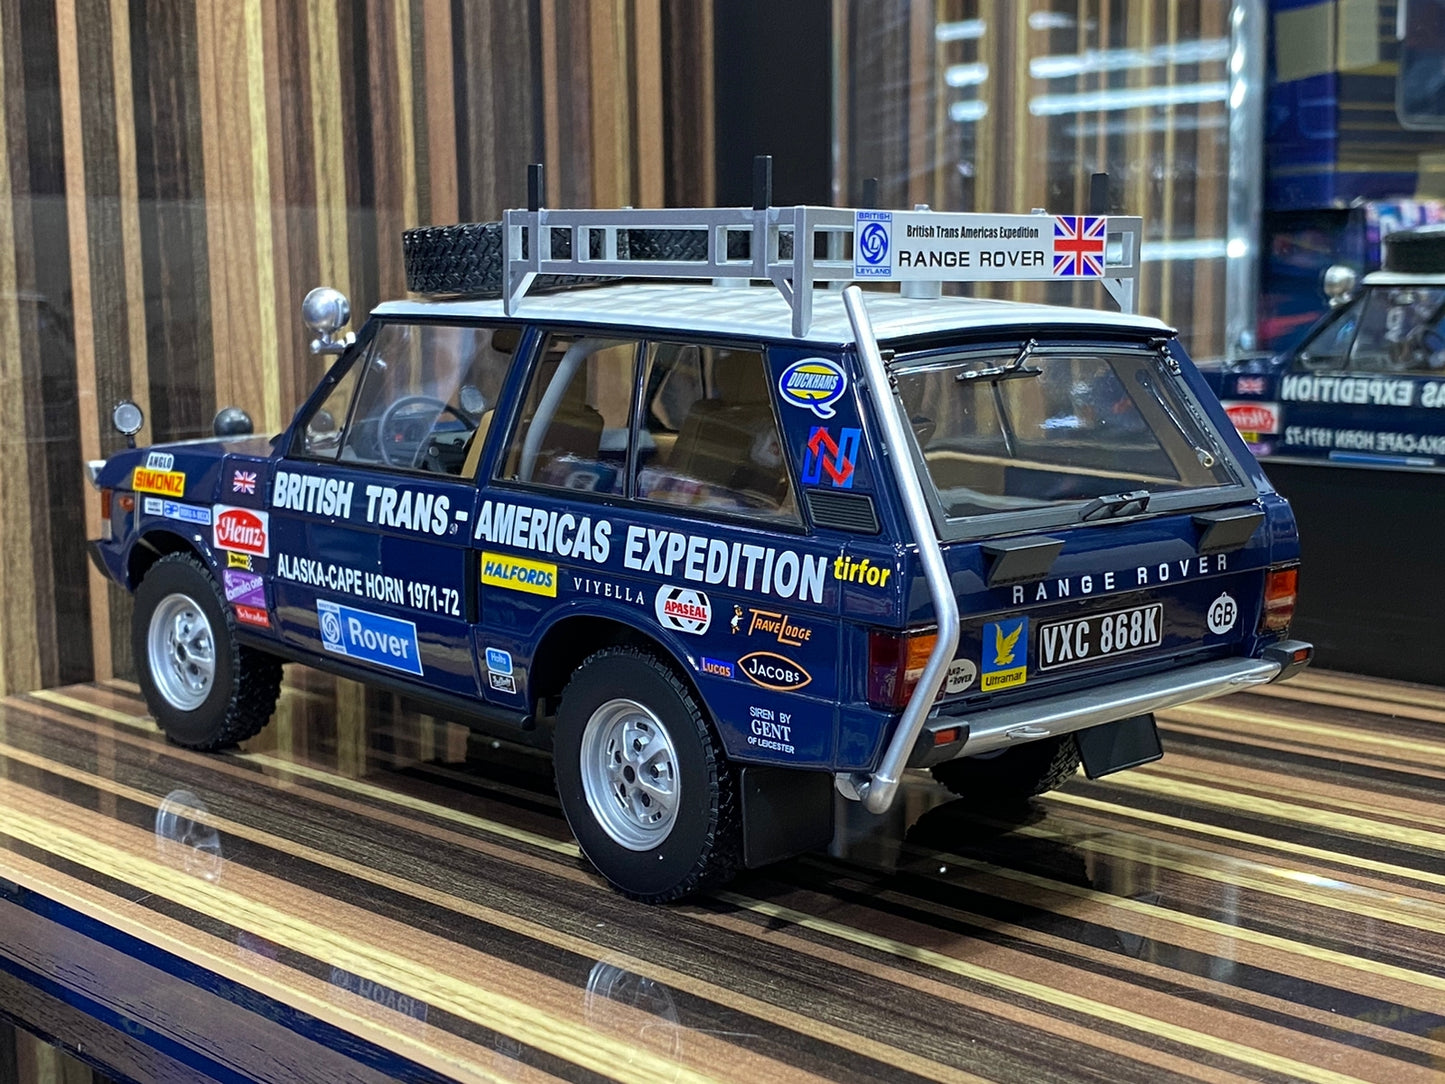 Land Rover Range Rover "The British Trans-Americas Expedition" 1971-1972 Almost Real